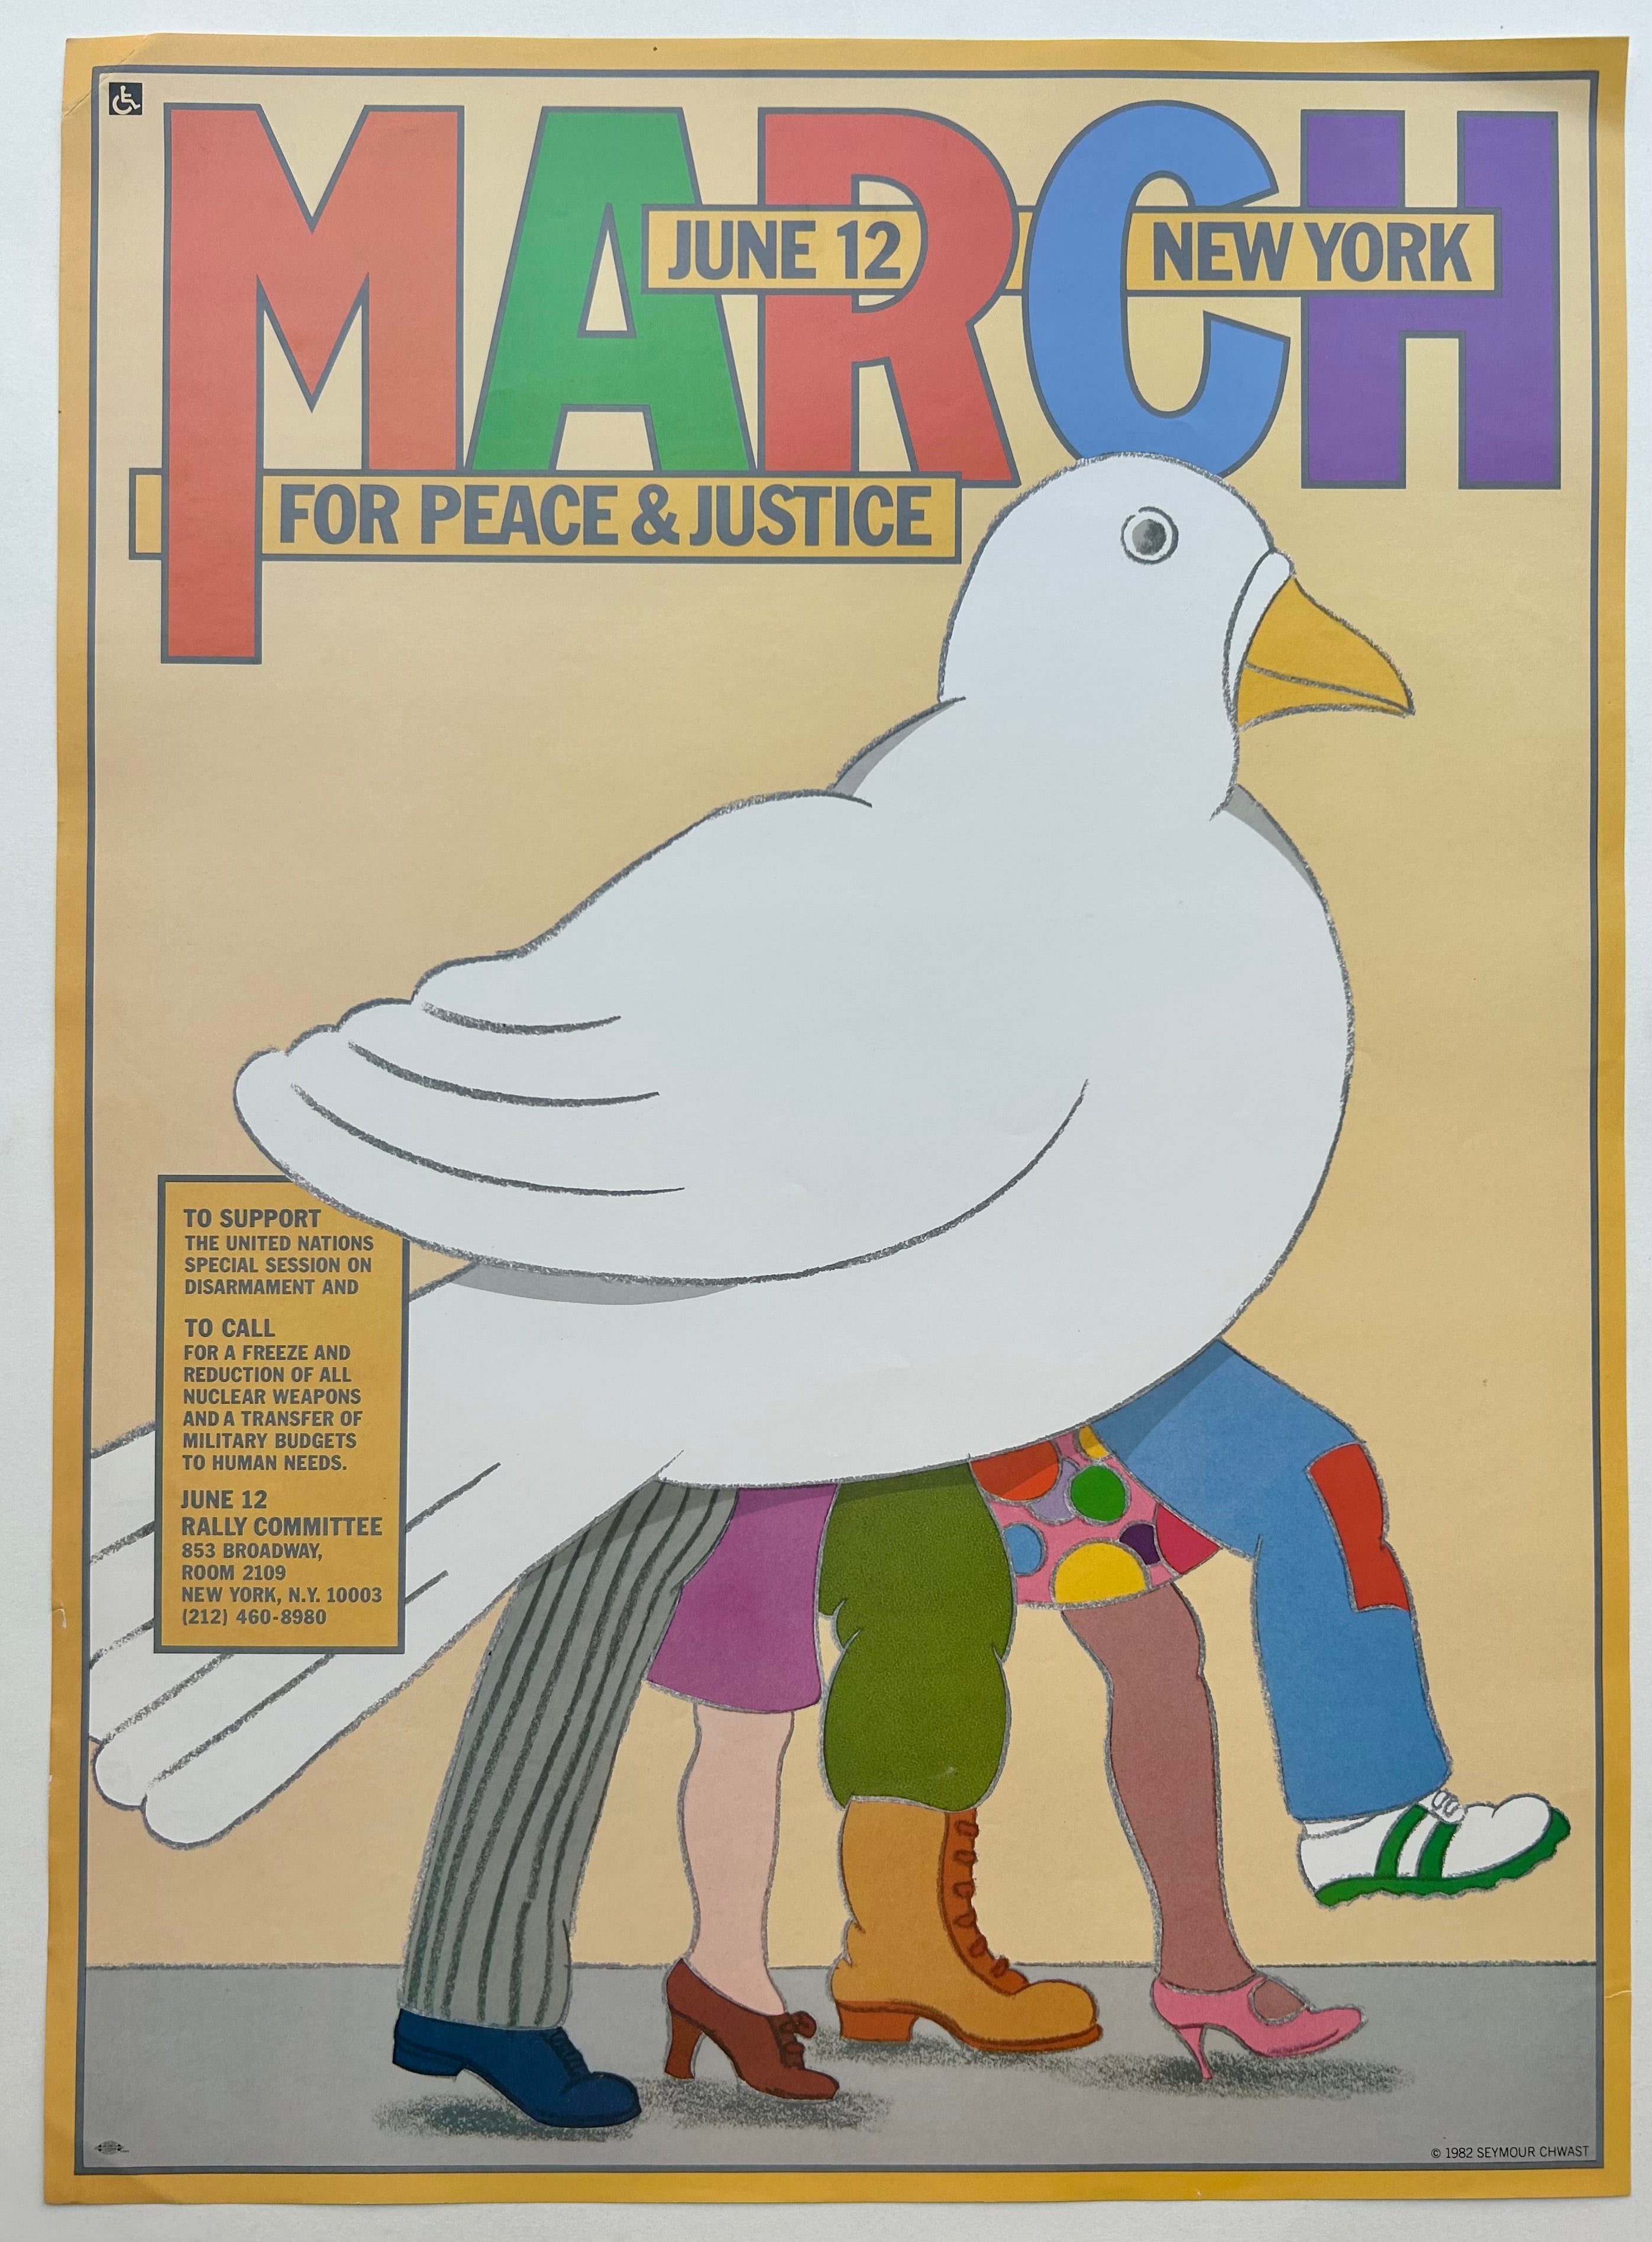 Light yellow background with yellow border shows a sketch of a white dove with five legs walking under the bird. MARCH is written in orange, green, red, blue, and purple. 